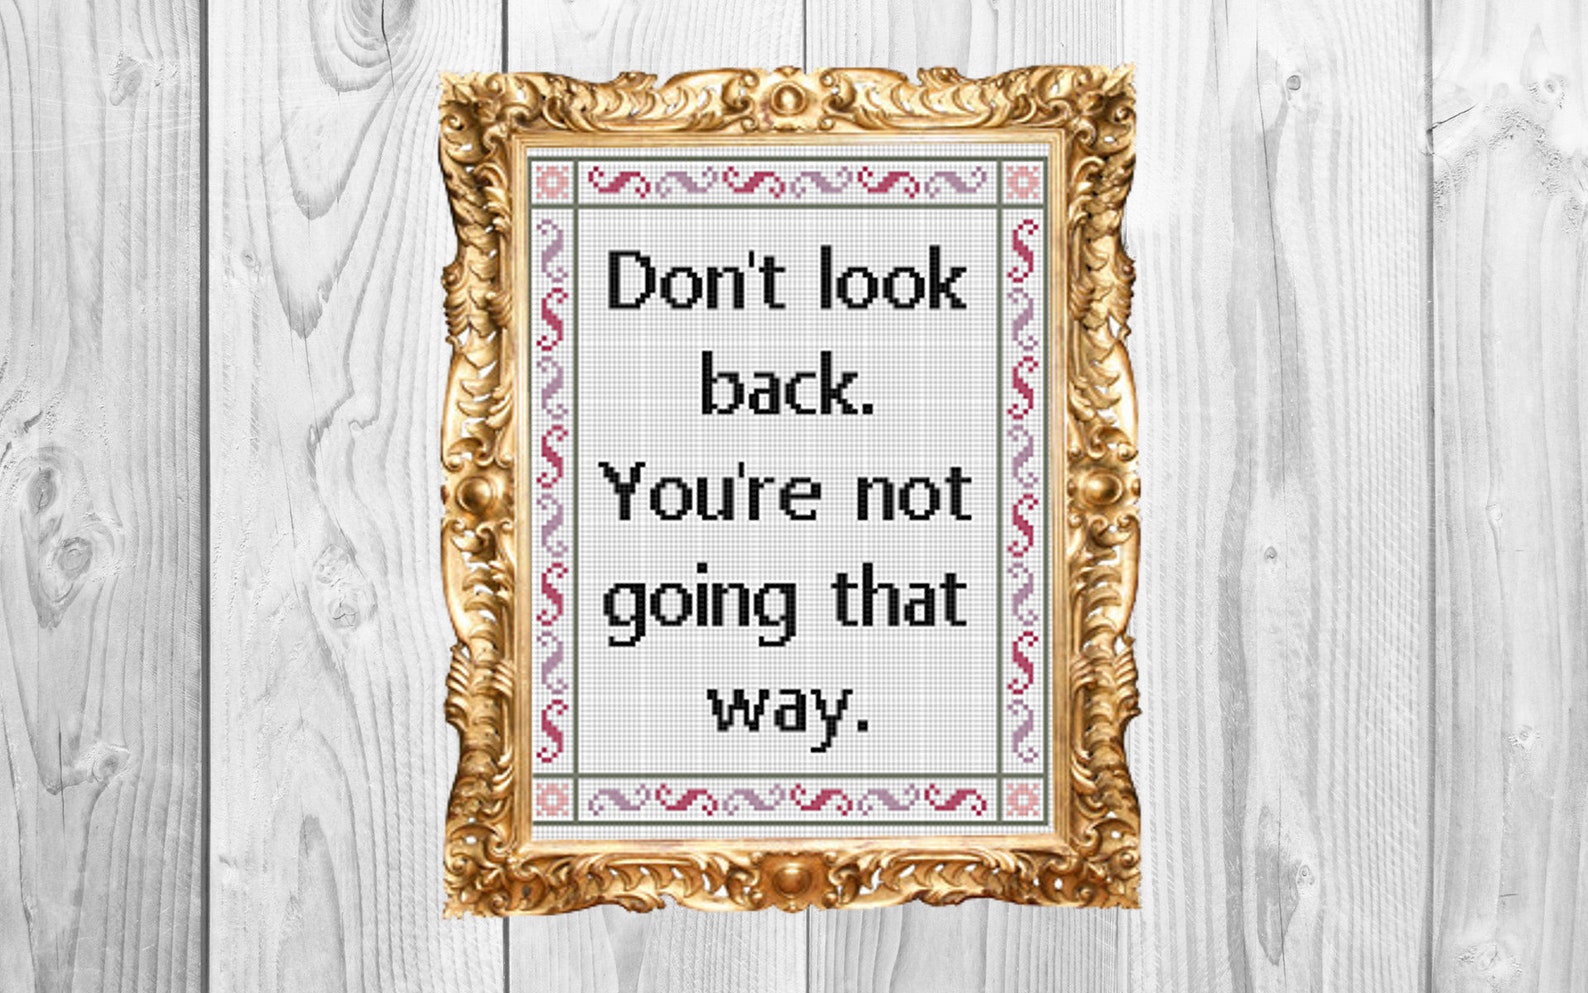 Don’t look back you’re not going that way. Dont way